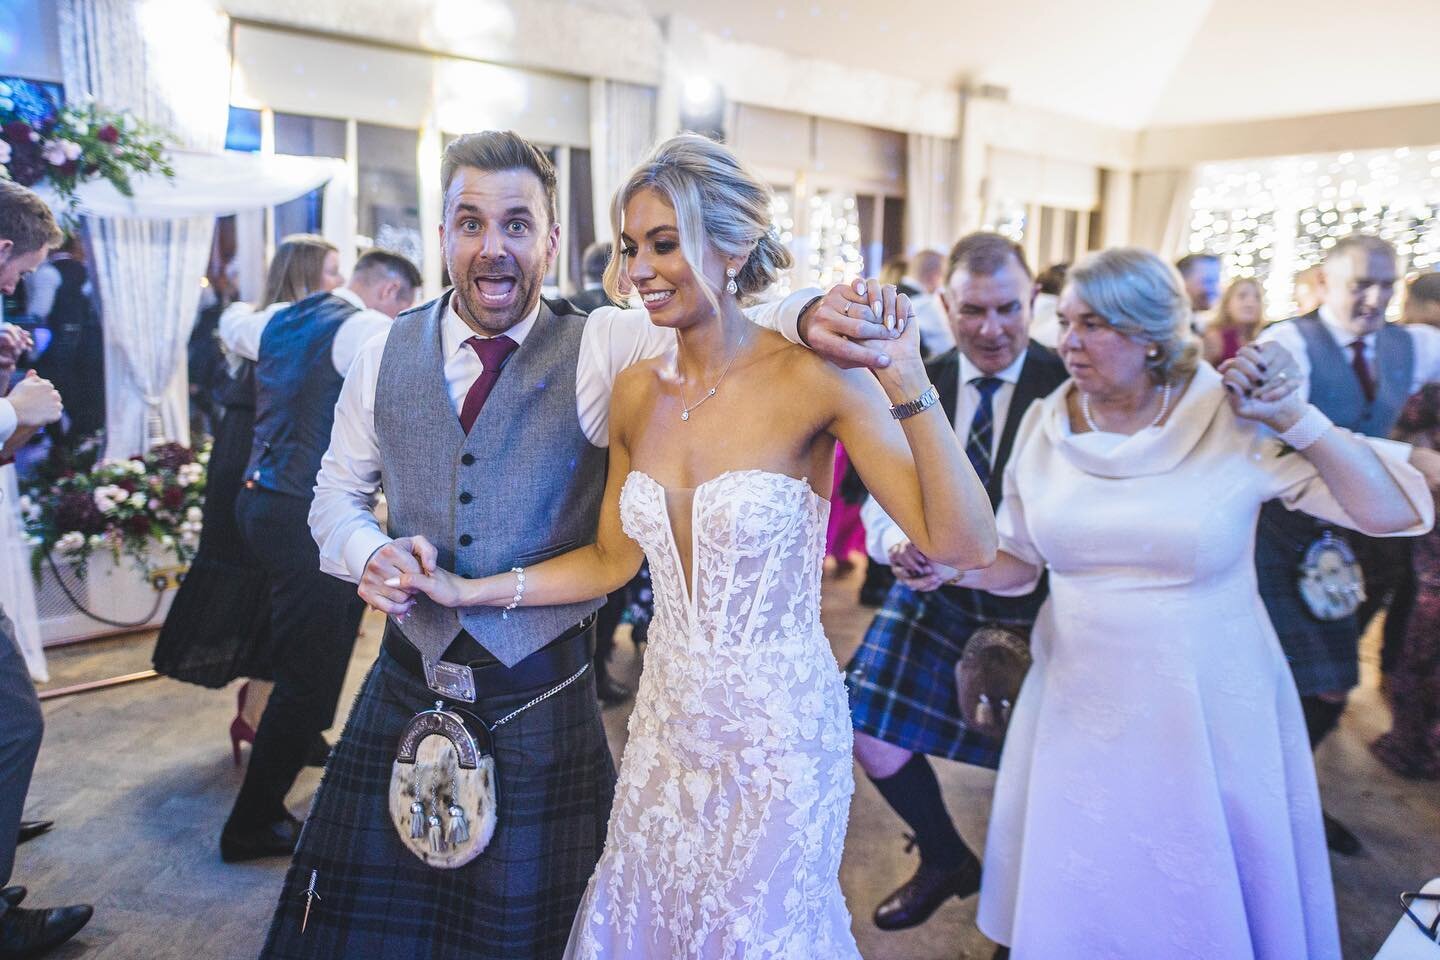 Friday 7th October // Jordan and Julie at @carlowrie_castle 

The most difficult part of this post was narrowing down the best 10 pictures to use!

Let&rsquo;s just say the DJ battle got a bit heated&hellip; 😂